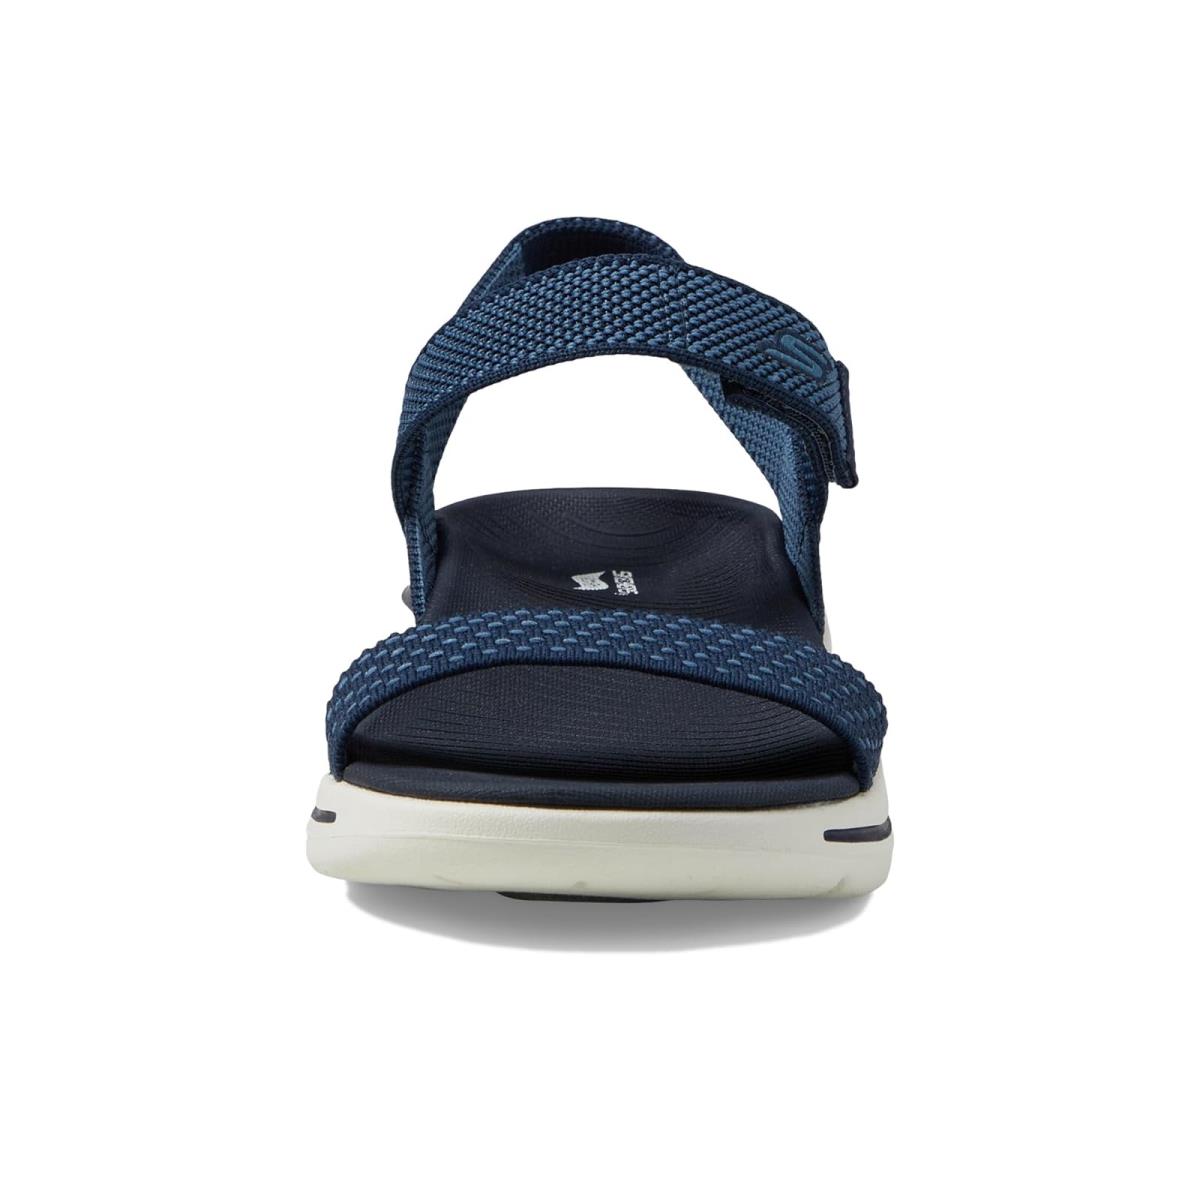 Woman`s Sandals Skechers Performance Go Walk Arch Fit Sandal-polished Navy